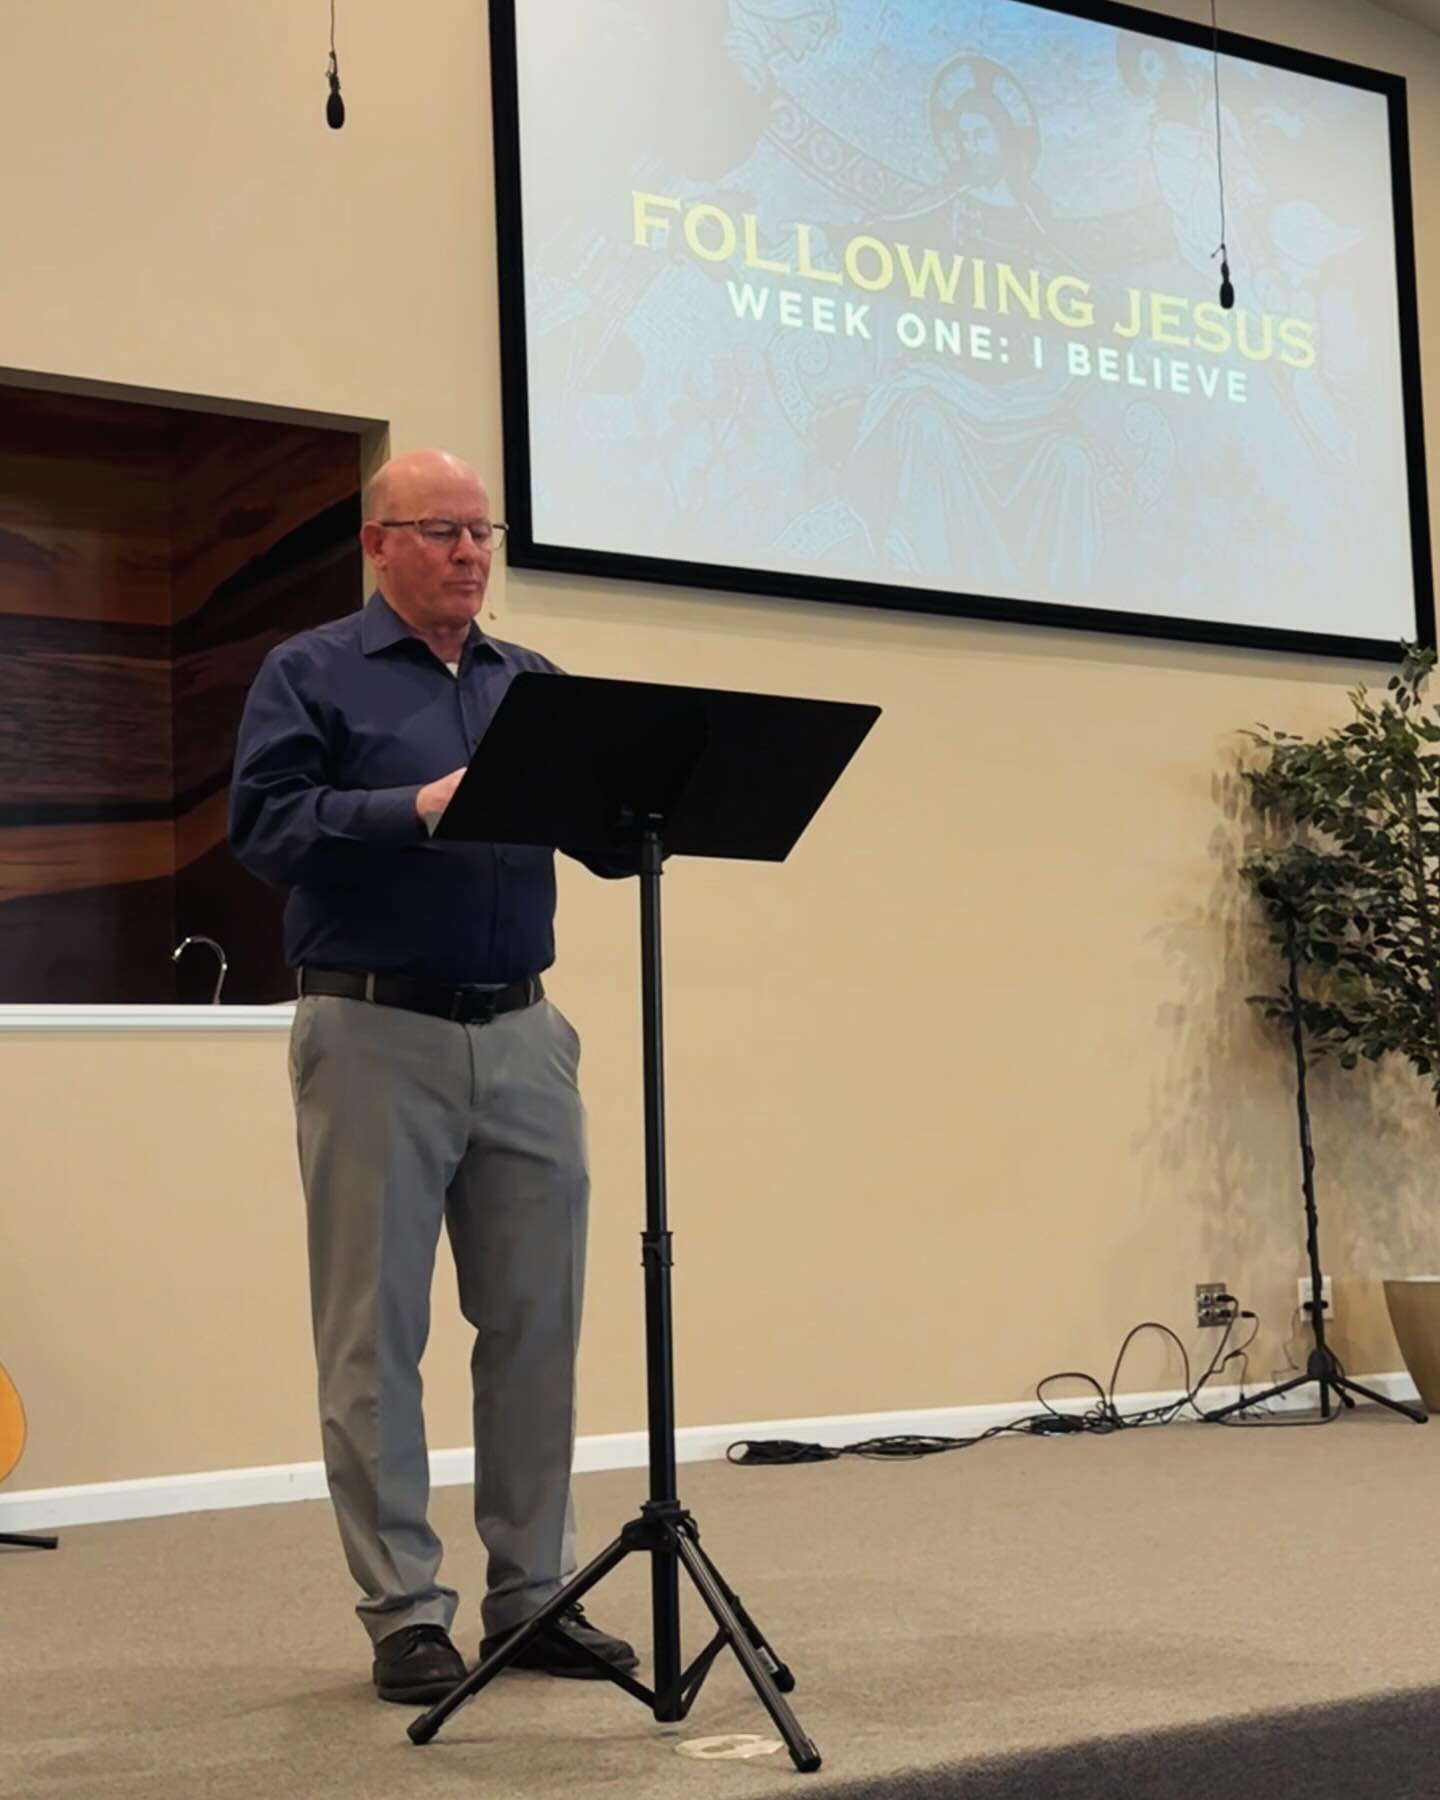 Today we kicked off our six week series, &ldquo;Following Jesus&rdquo;, designed to teach discipleship. Join us Sundays at 11am!